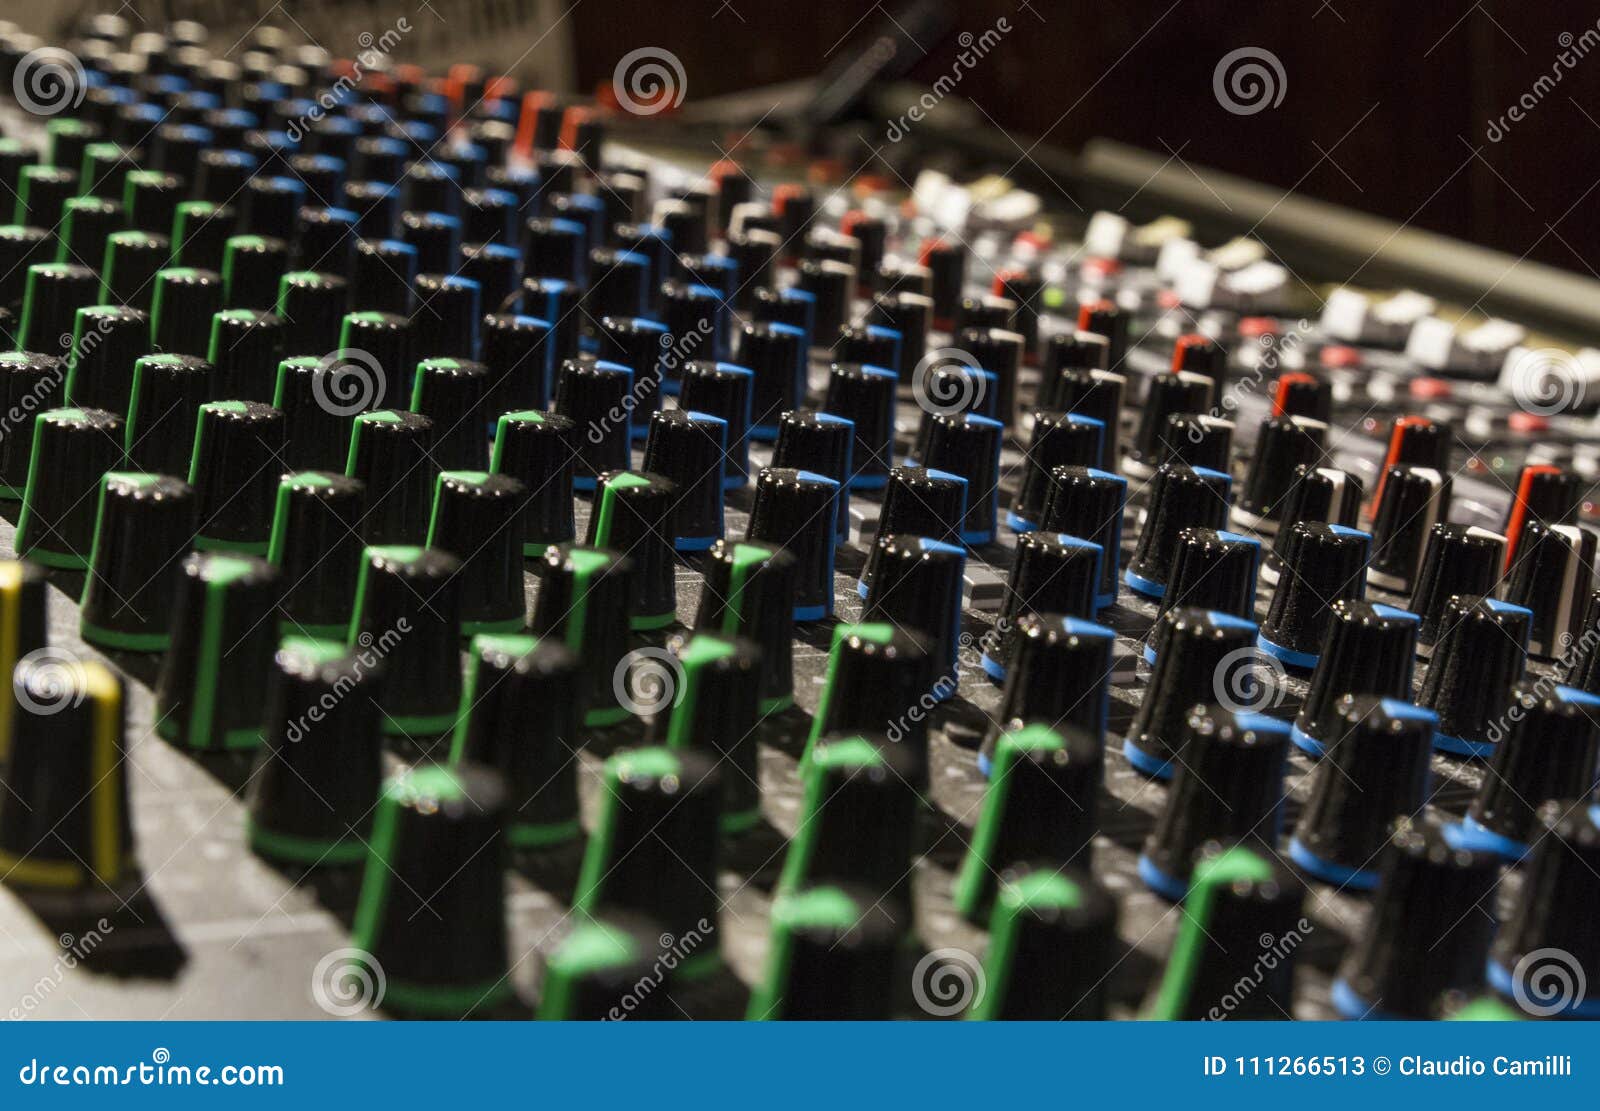 cursor of mixer used for menage the sound in live concert